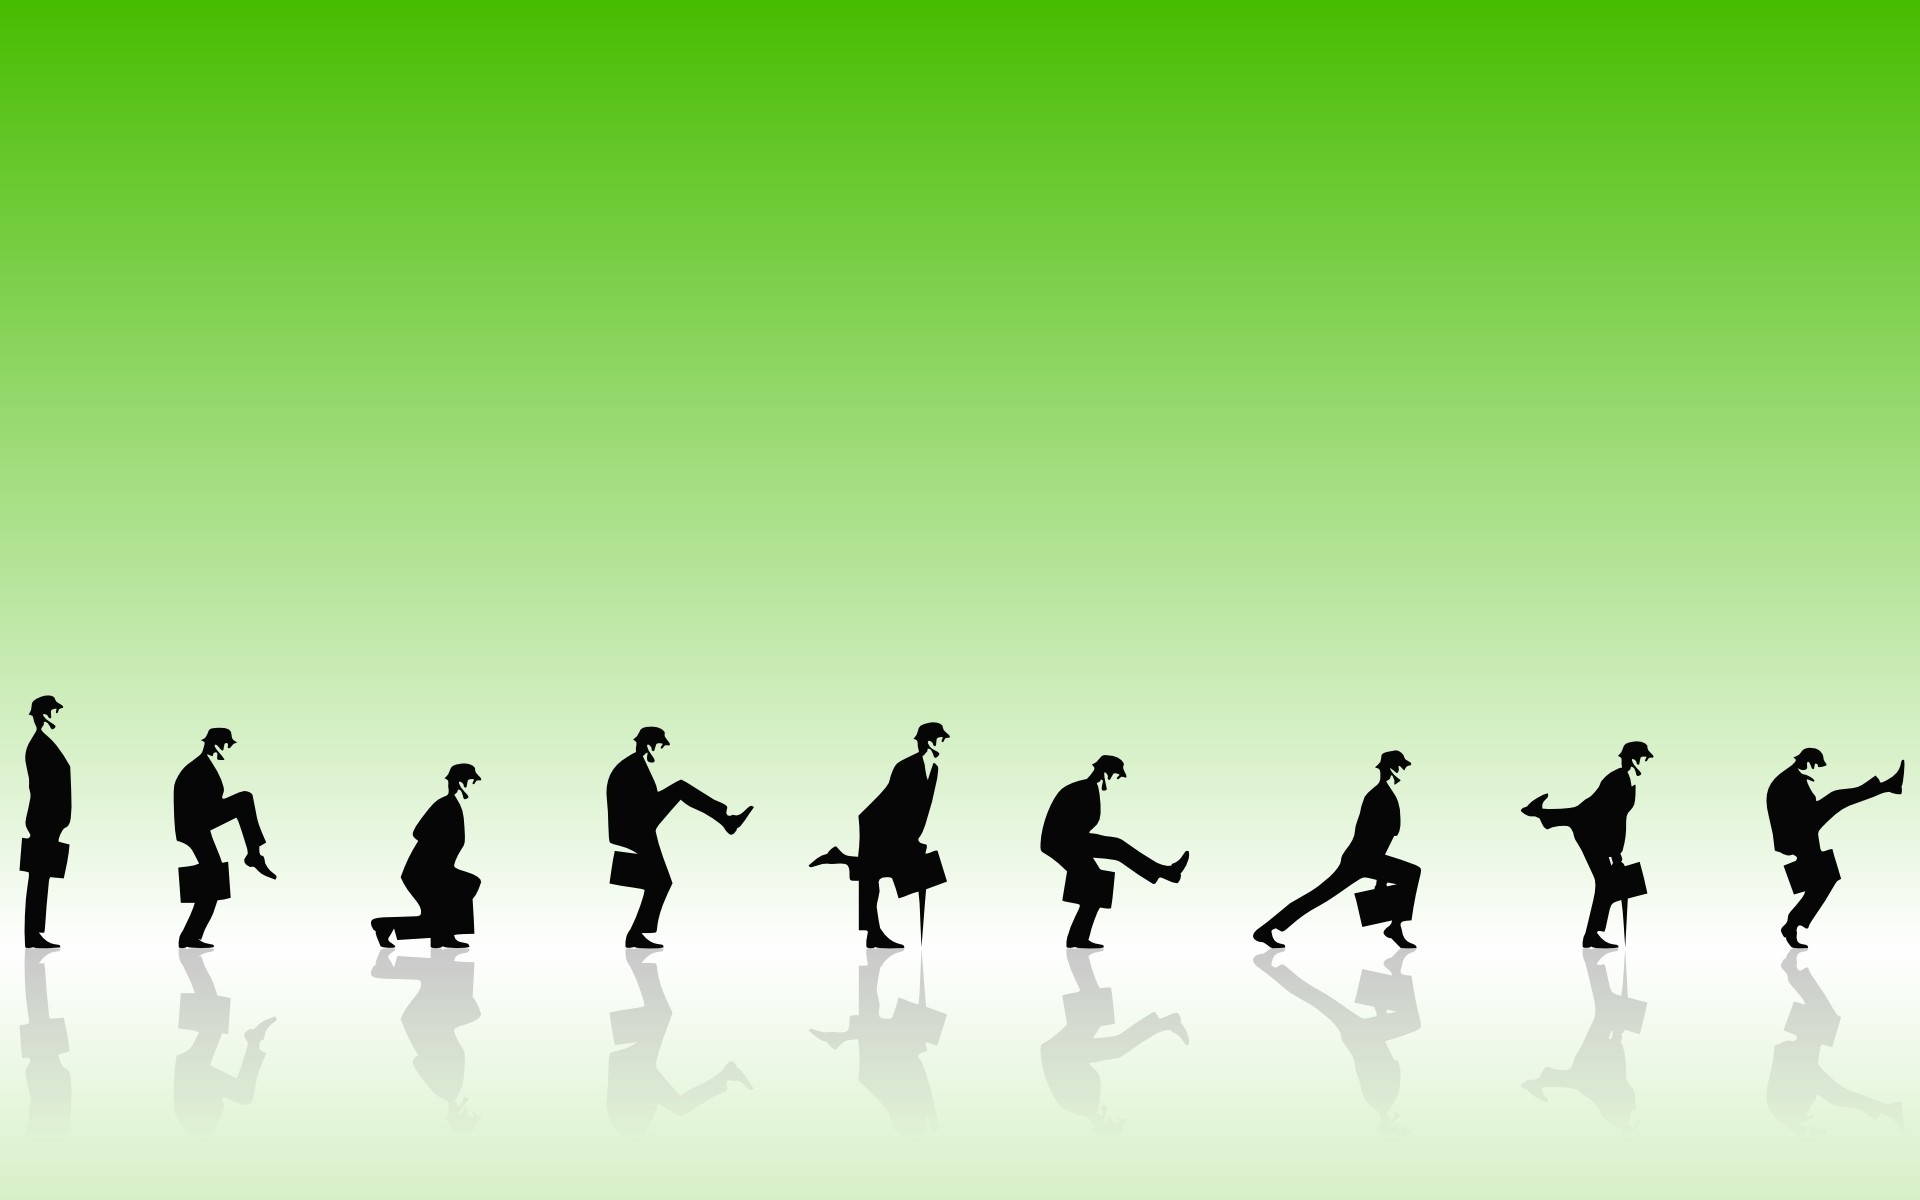 General 1920x1200 Monty Python Ministry of Silly Walks humor digital art simple background